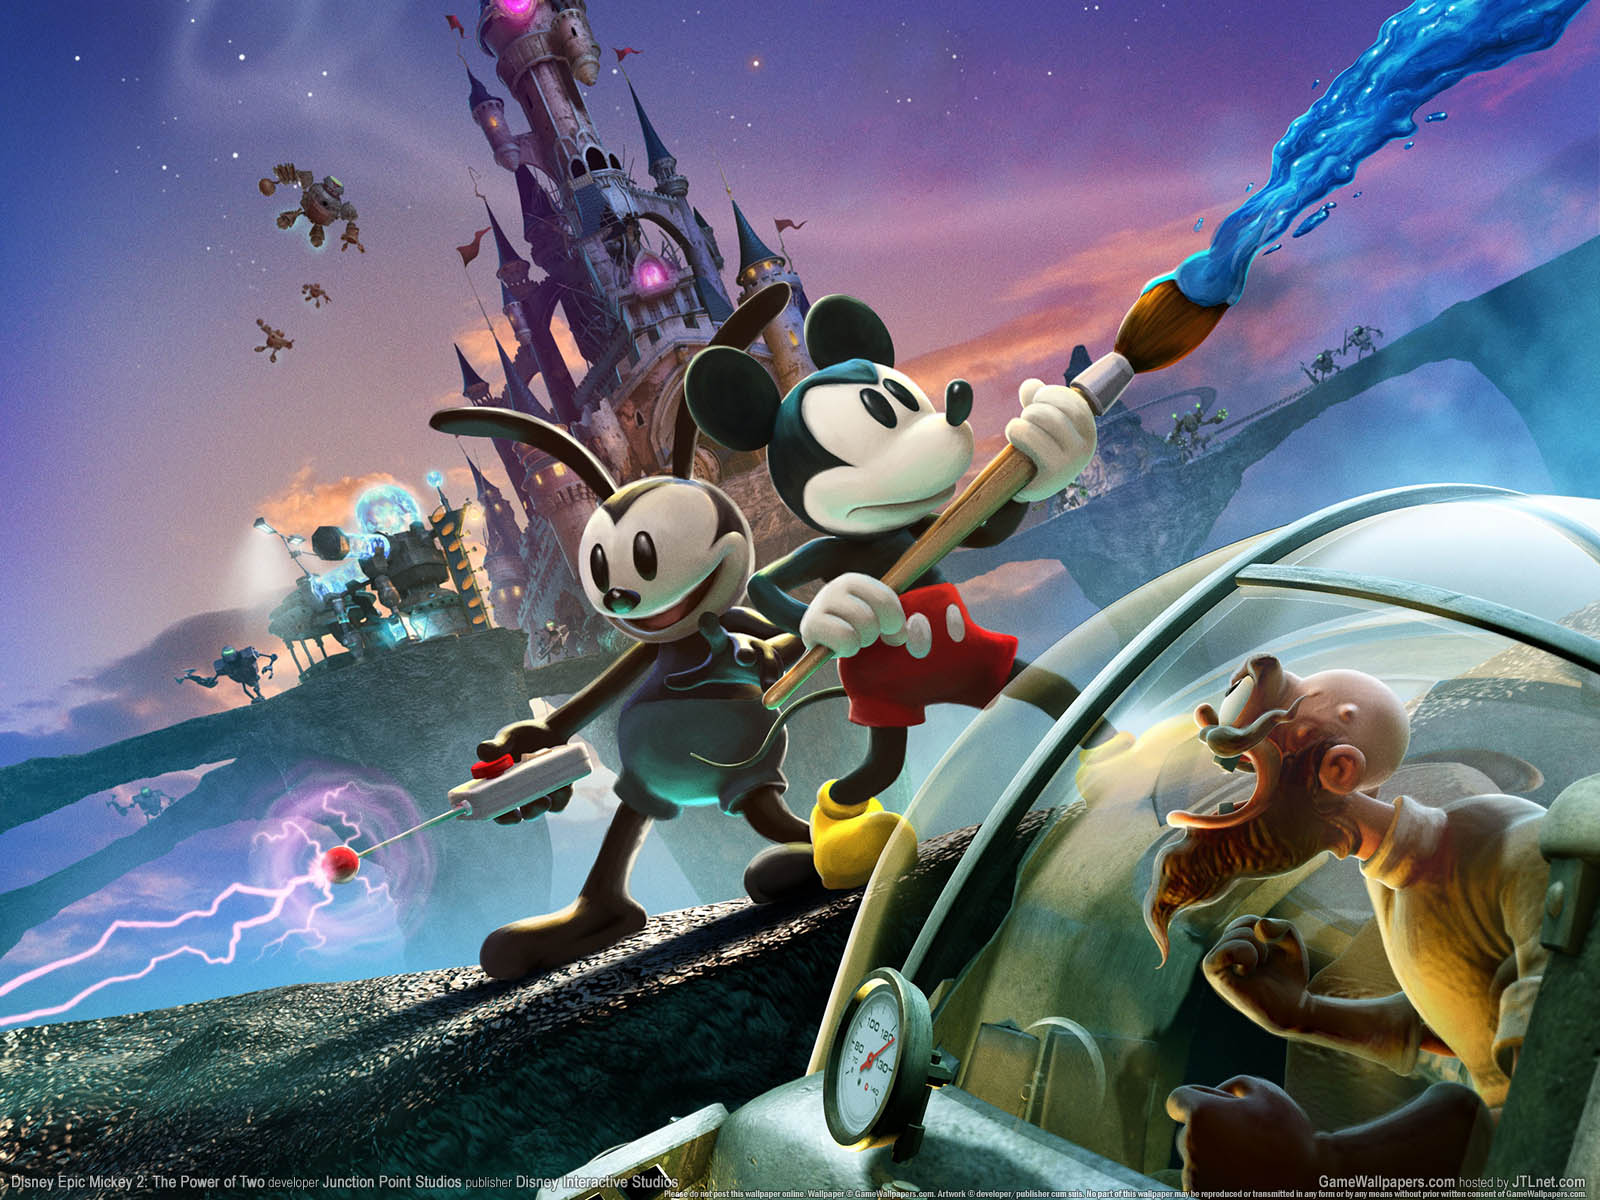 Disney Epic Mickey 2%3A The Power of Two fond d'cran 01 1600x1200